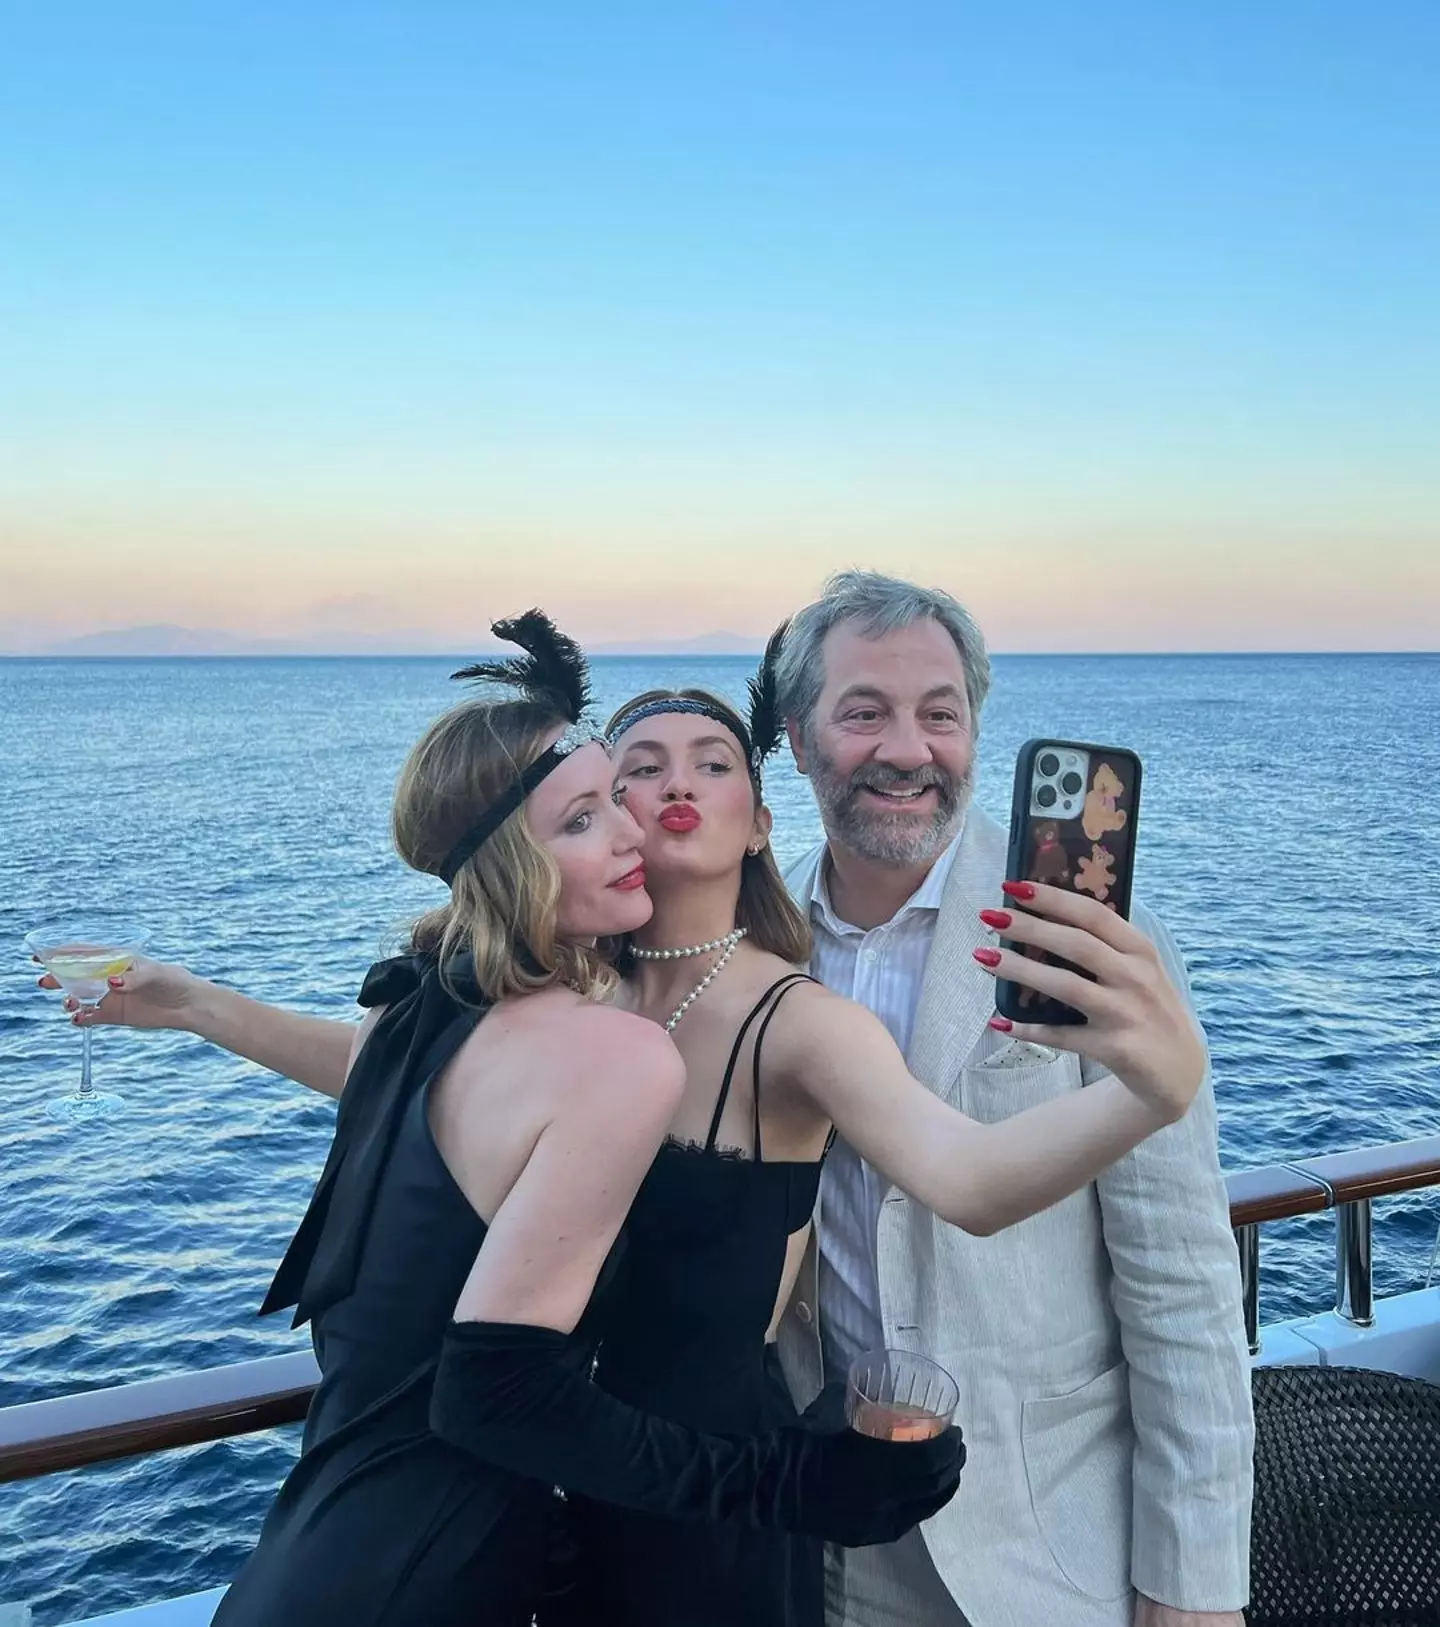 Maude Apatow with her parents Judd Apatow and Leslie Mann.